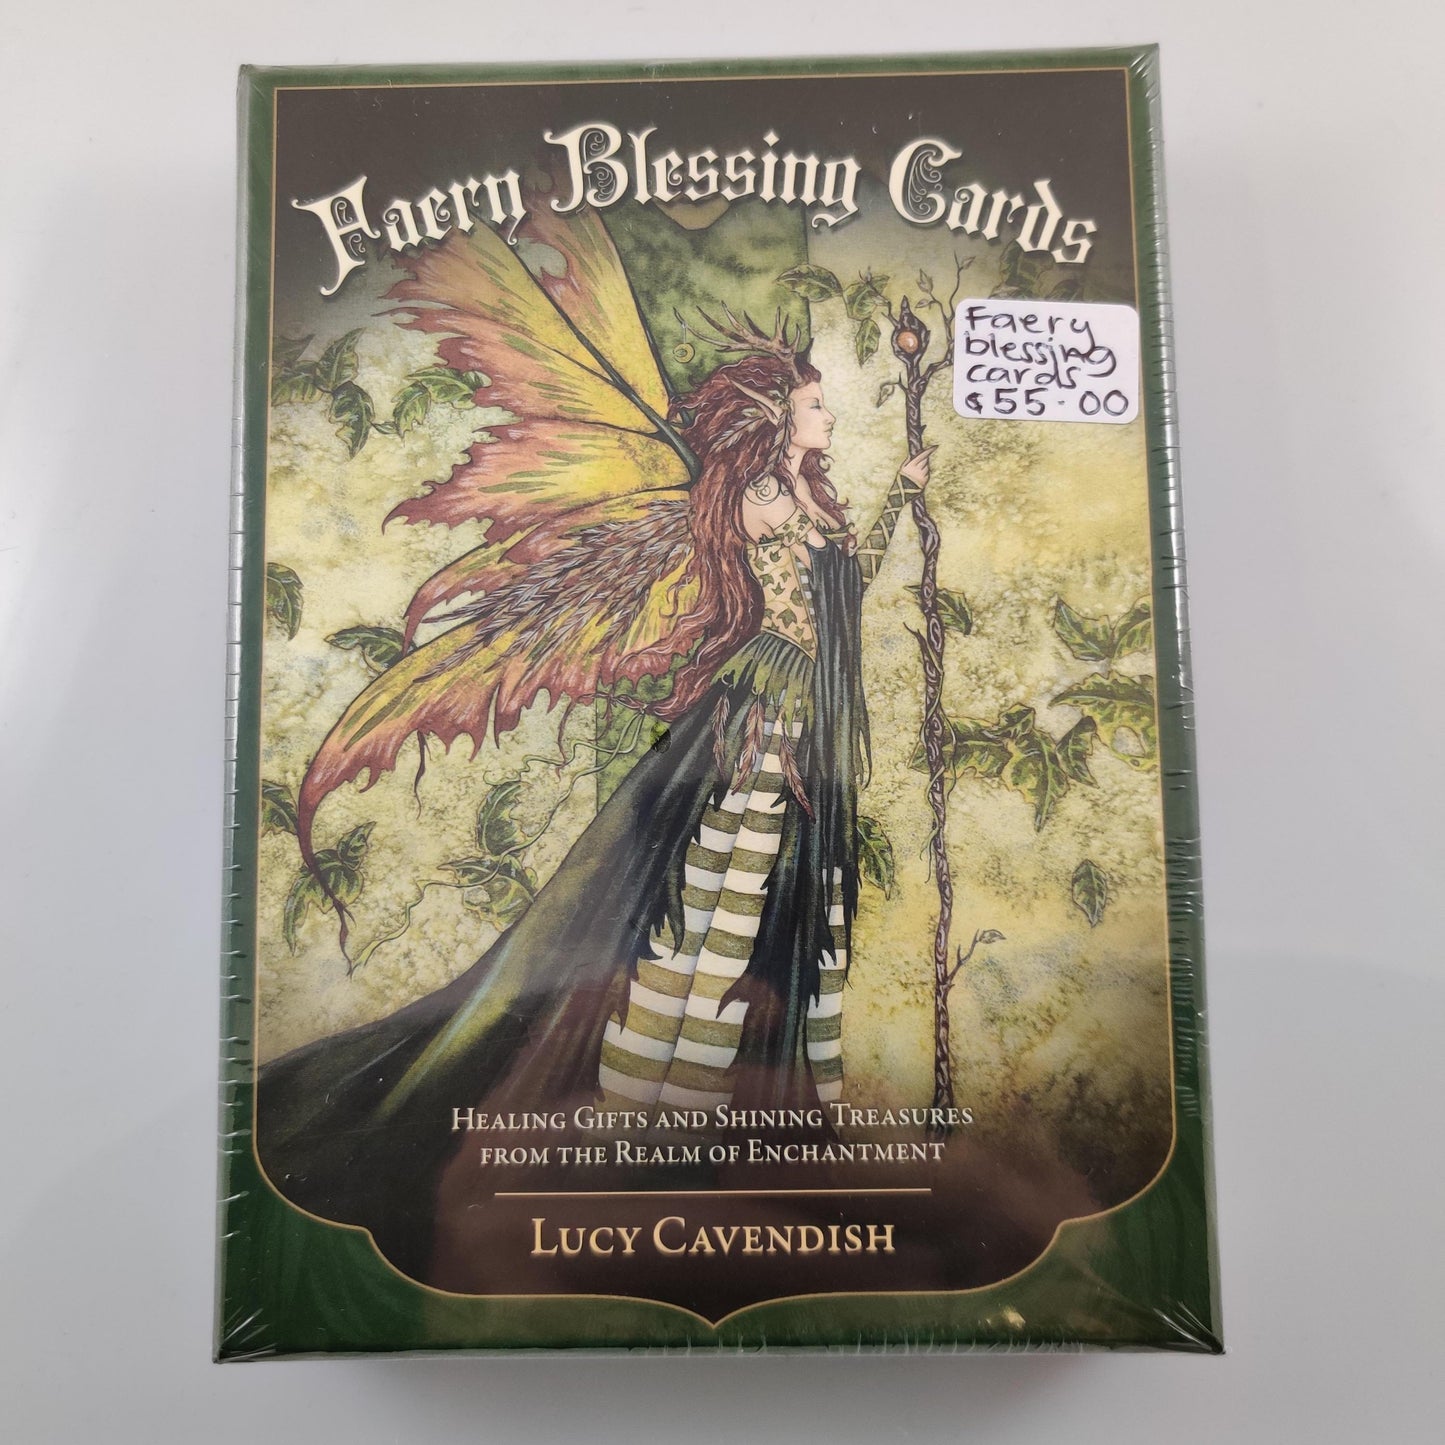 Faery Blessing Cards - Rivendell Shop